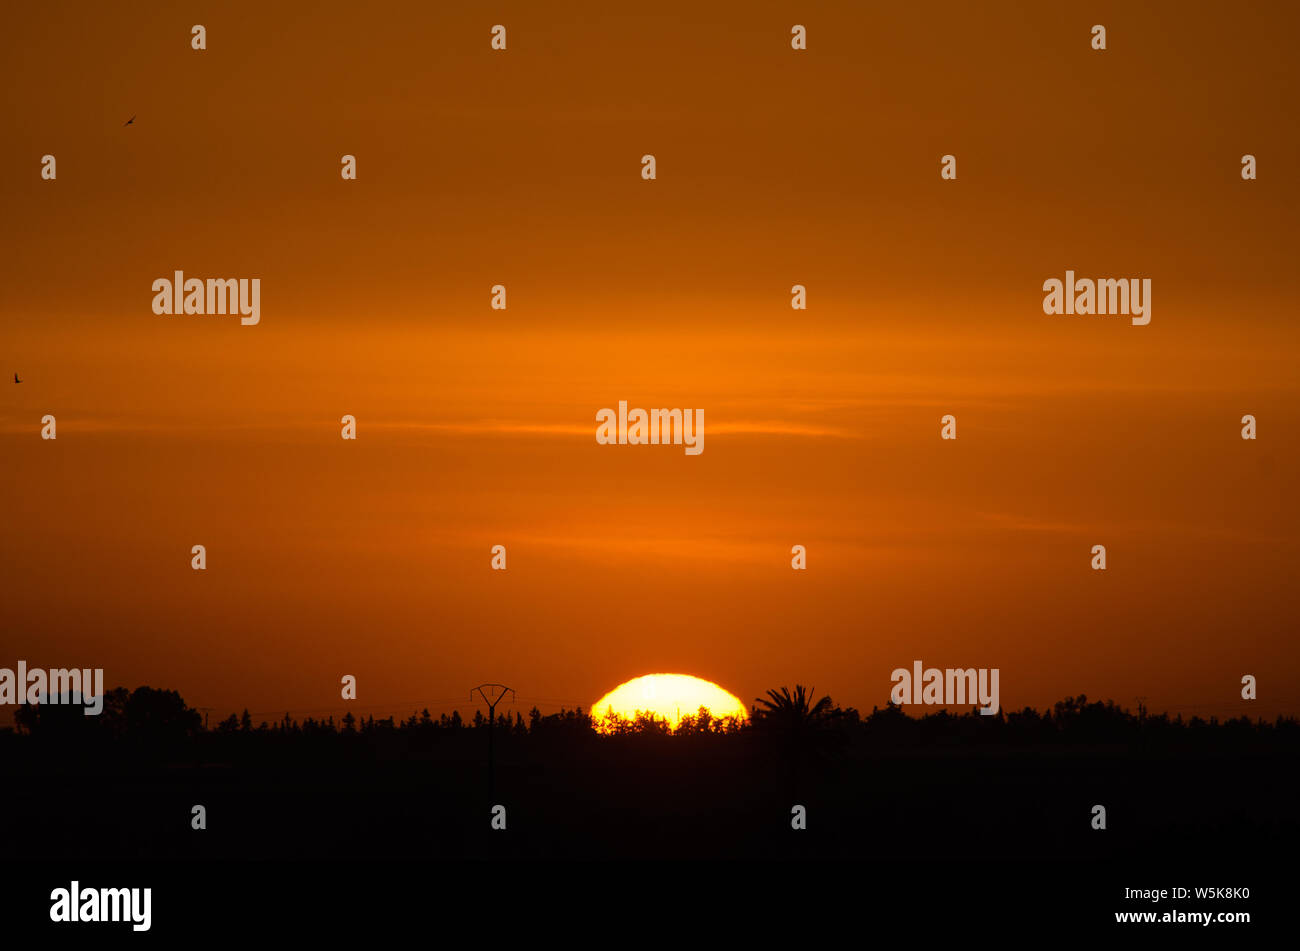 The sun I waited for a long time begins to rise majestically, magical moment and very moving ... Stock Photo